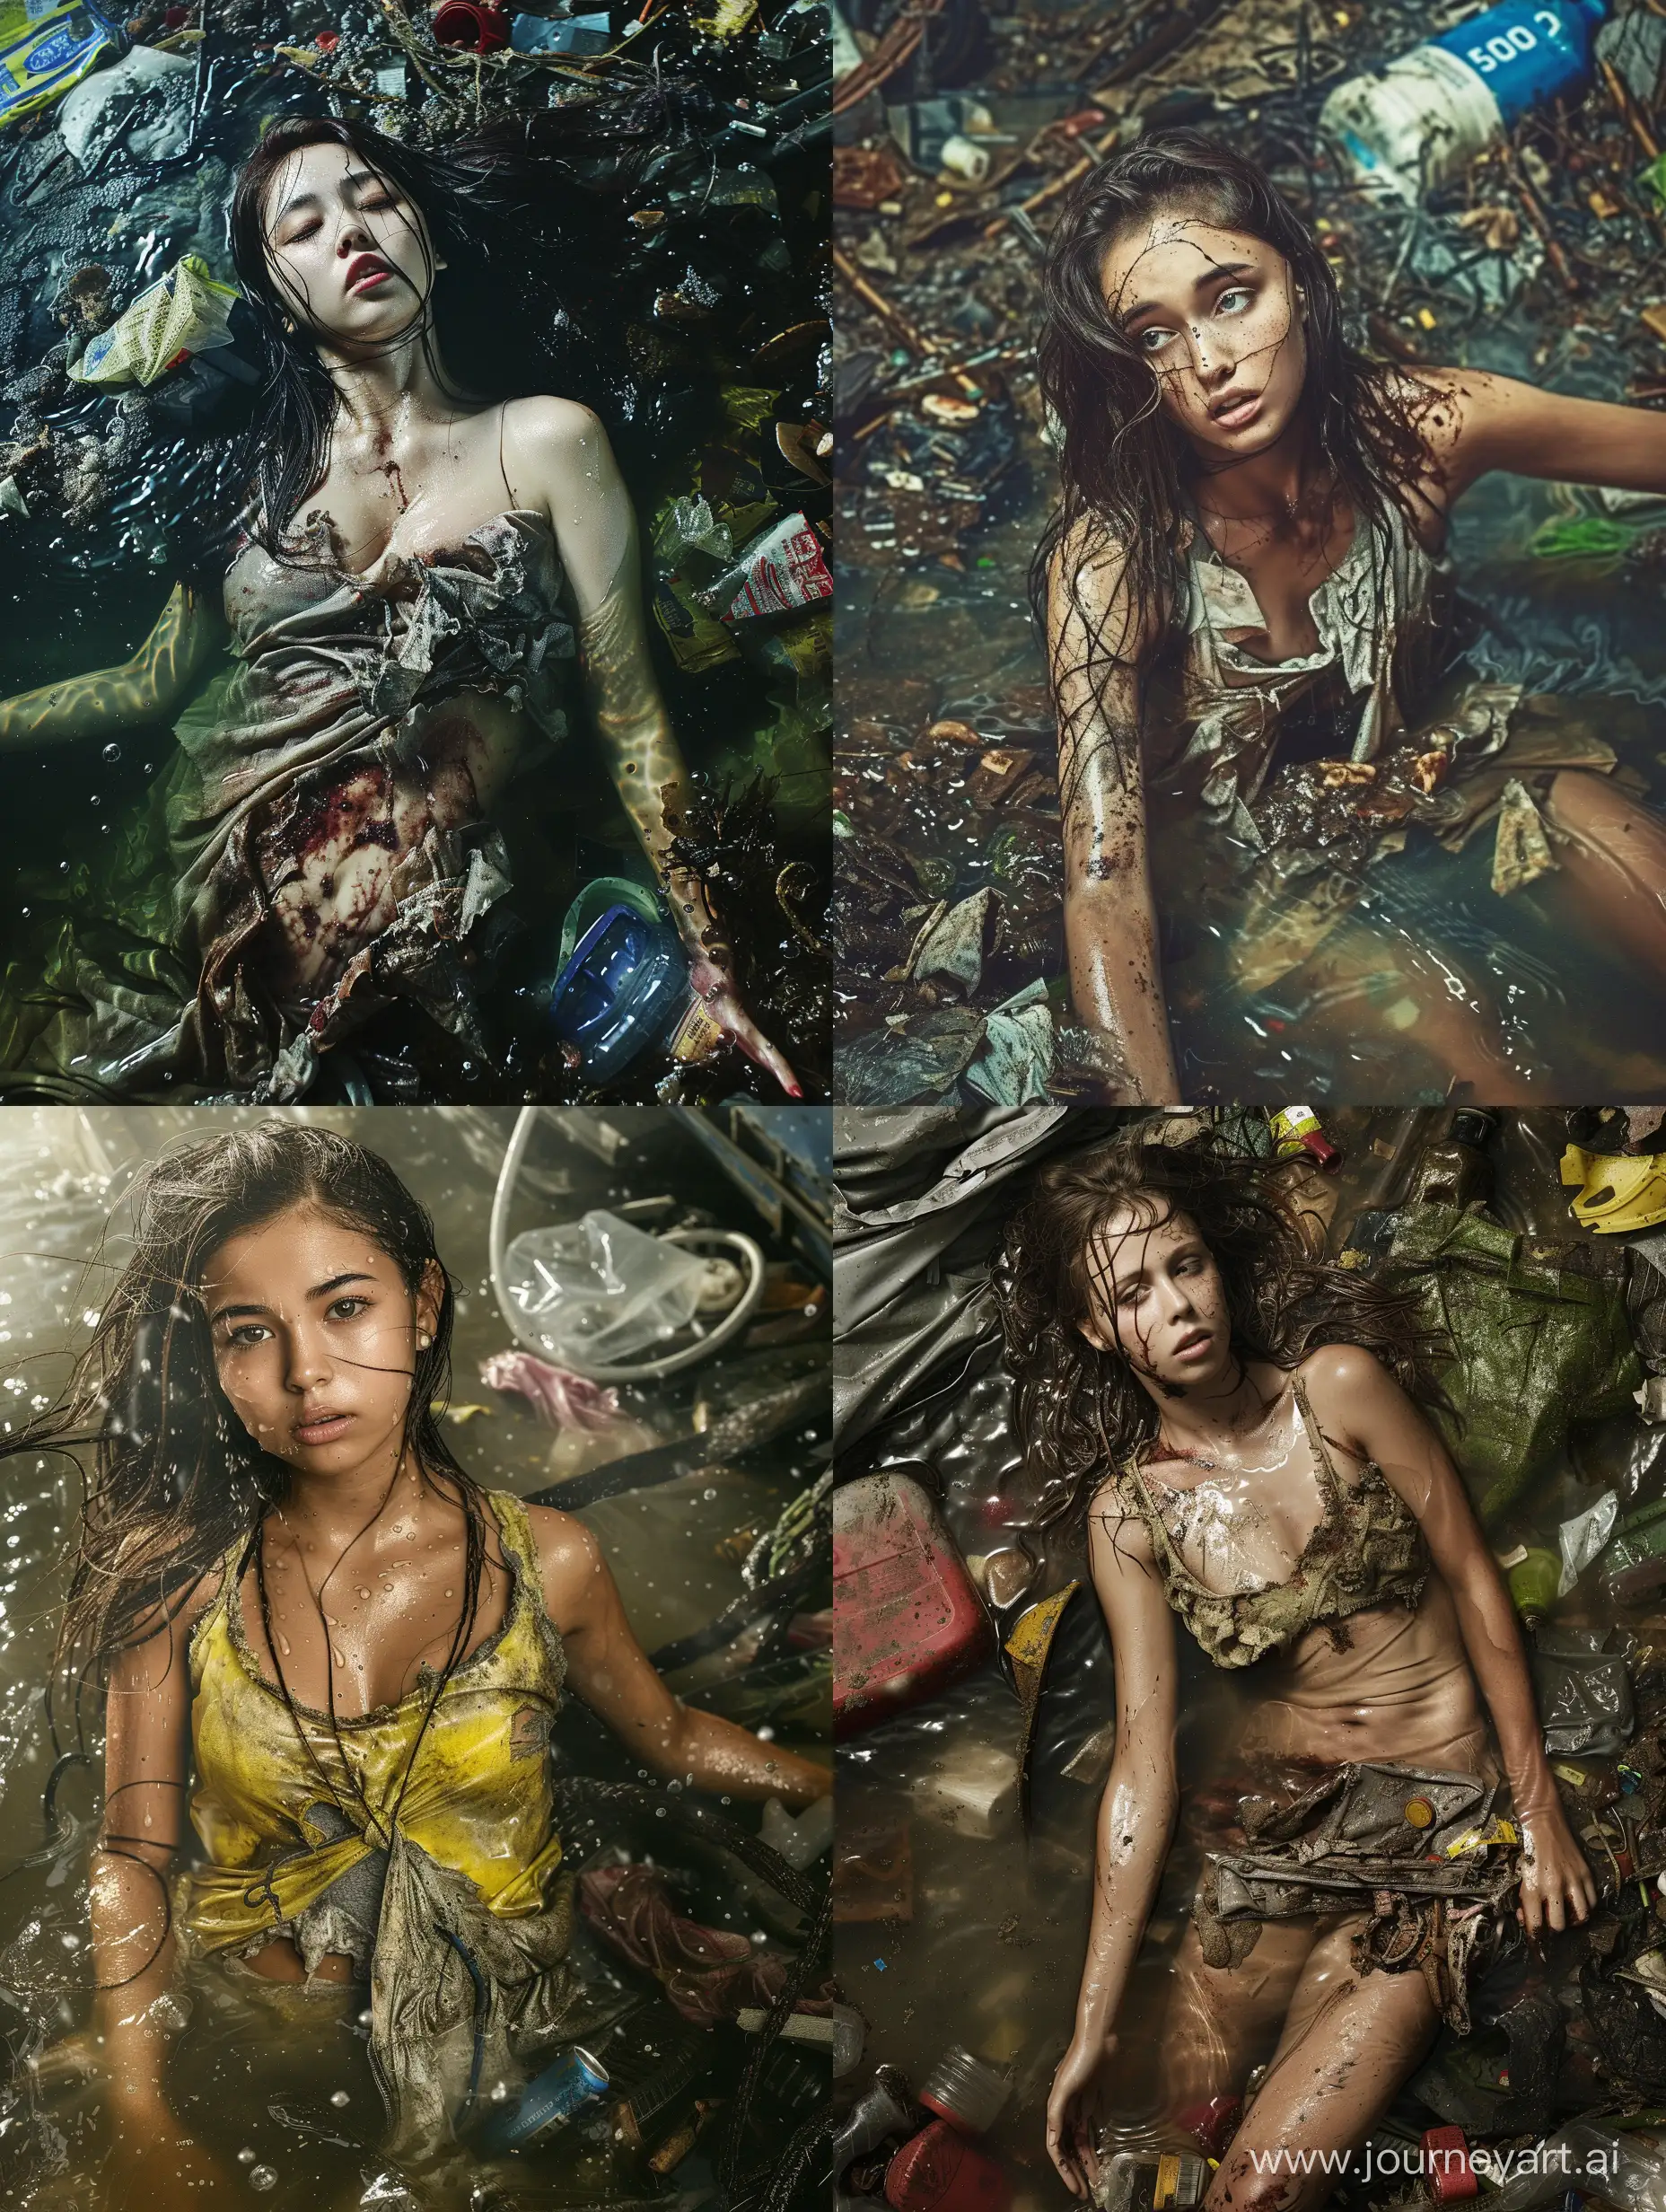 Stunning-Young-Woman-Immersed-in-Liquid-Amid-Trash-Hyper-Realistic-Photography